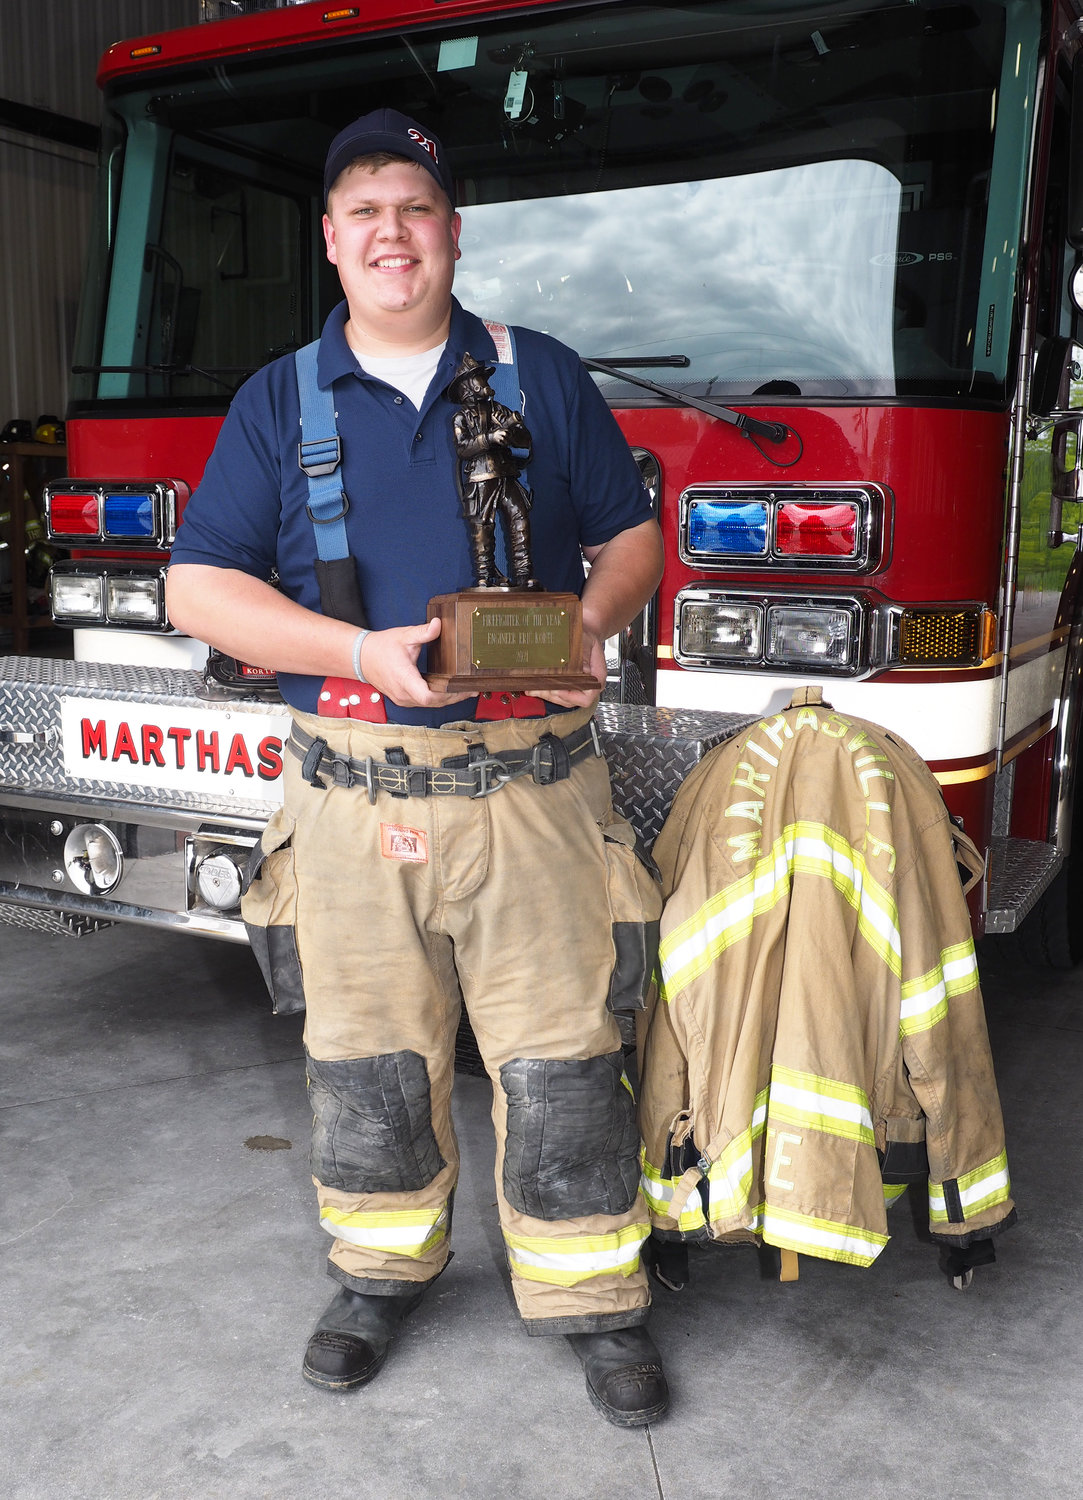 FIREFIGHTER OF THE YEAR — Engineer and firefighter Eric Korte was awarded as the top firefighter for 2021 for the Marthasville Fire Protection District. Korte was selected by his fellow firefighters to receive the recognition. Korte has been with the fire department for eight years.